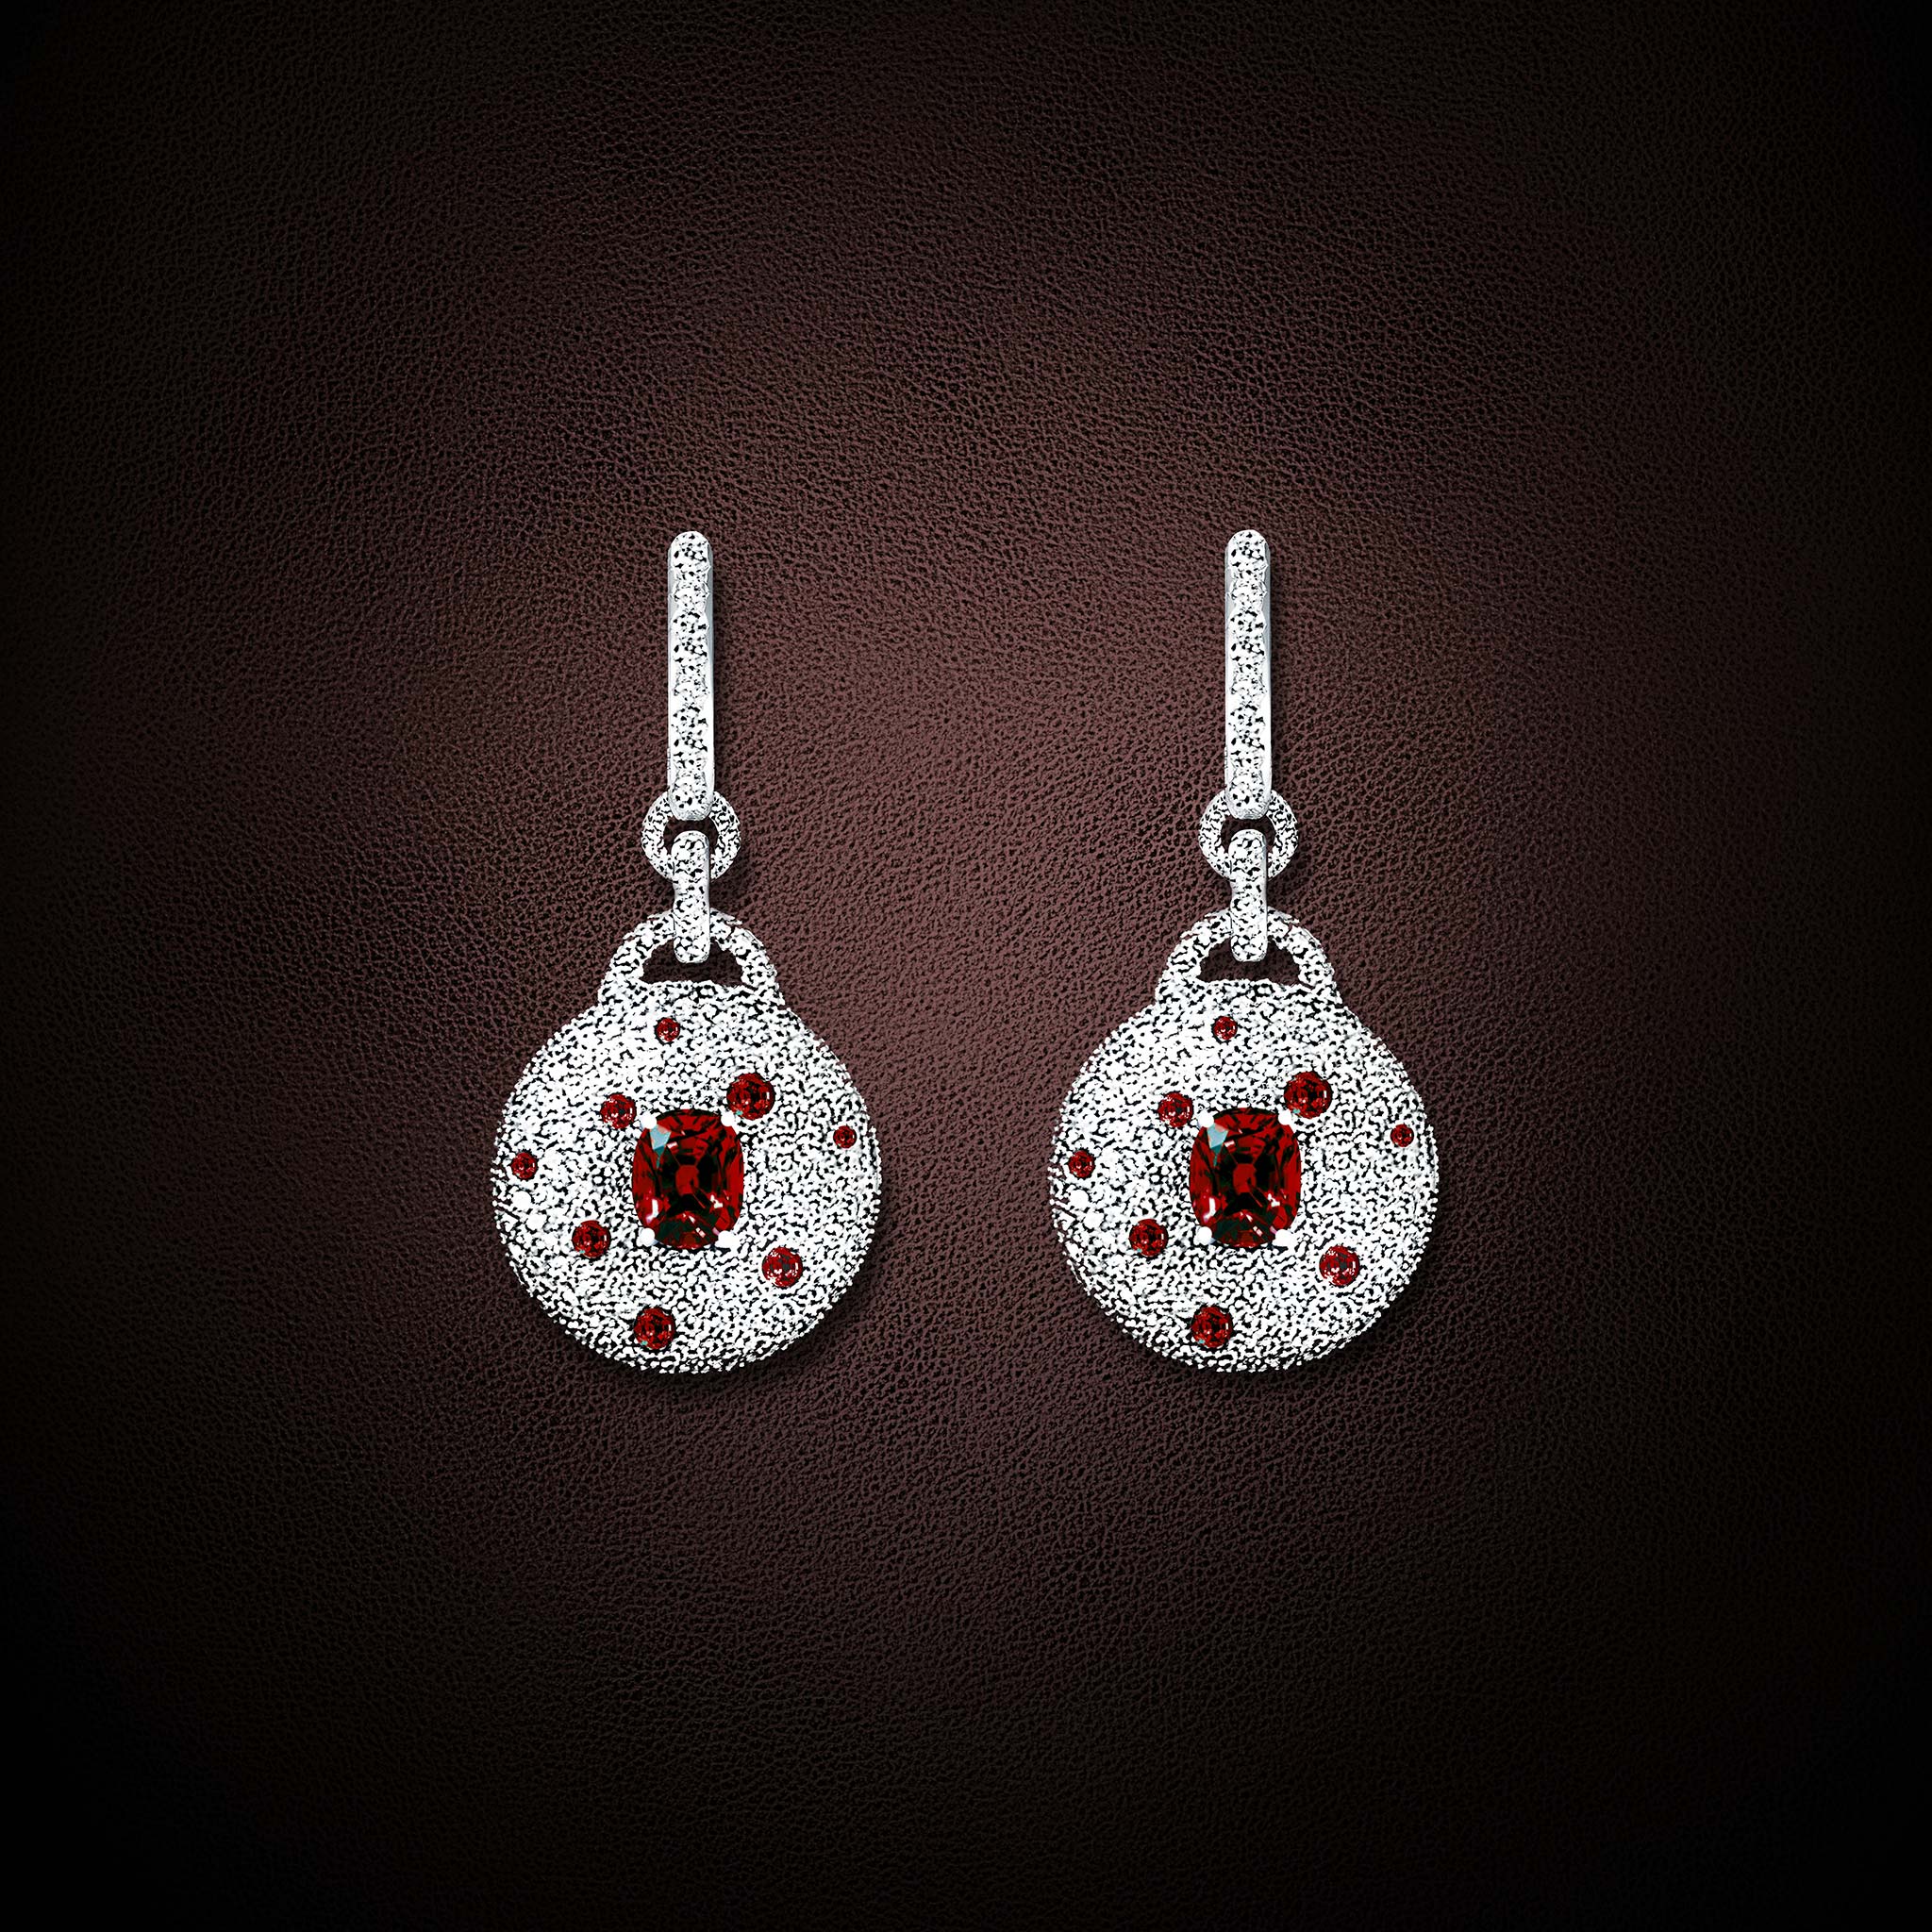 Earrings TALISMAN diamonds, rubies and red spinelle